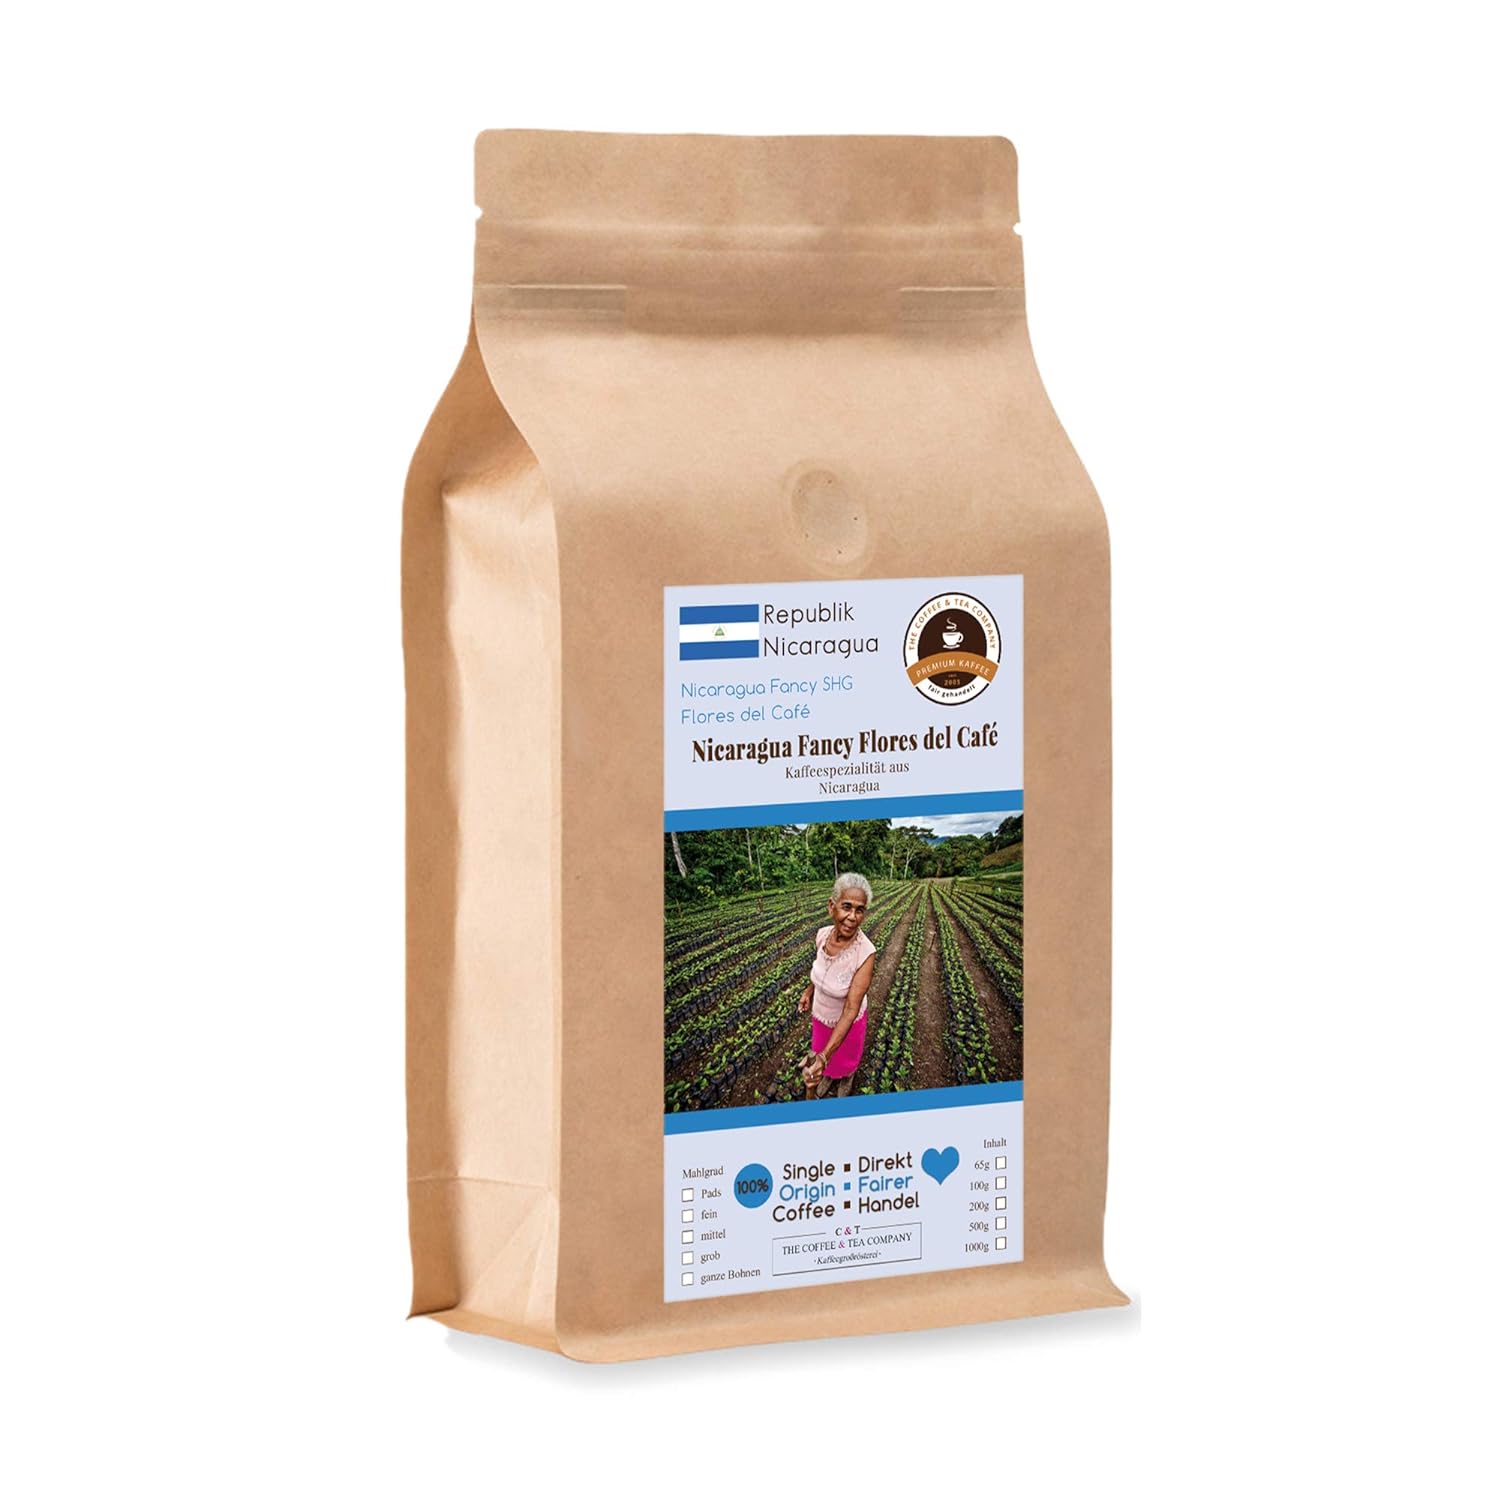 Coffee Globetrotter - Coffee with Heart - Nicaragua Fancy Flores del Café - 200 g Whole Bean - Top Coffee from the Women\'s Fund Project Fair Traded Supports Social Projects